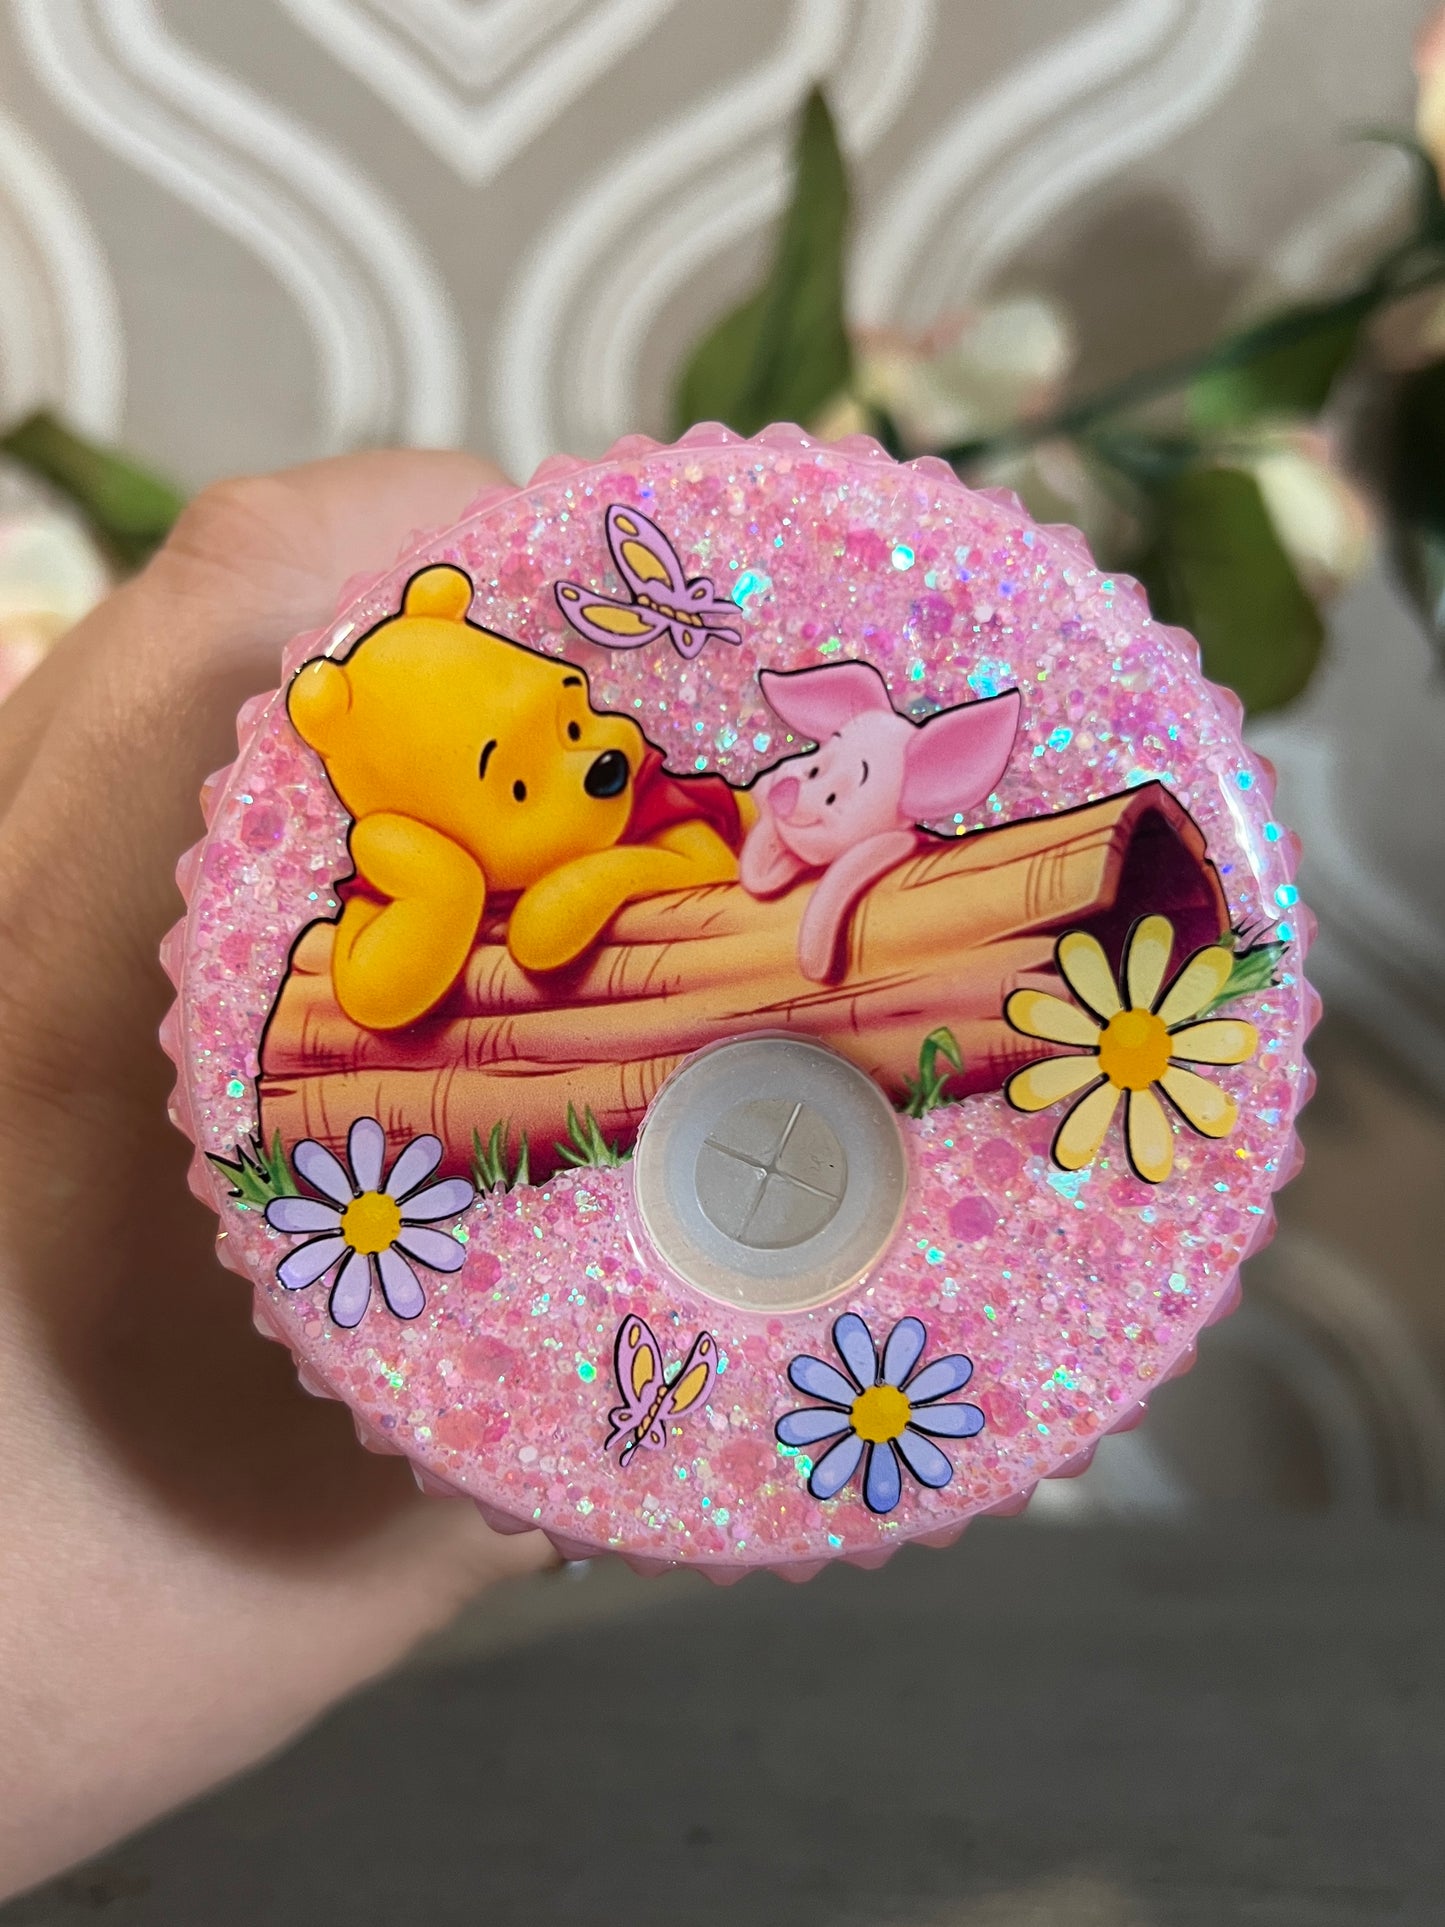 Baby Pooh and friends